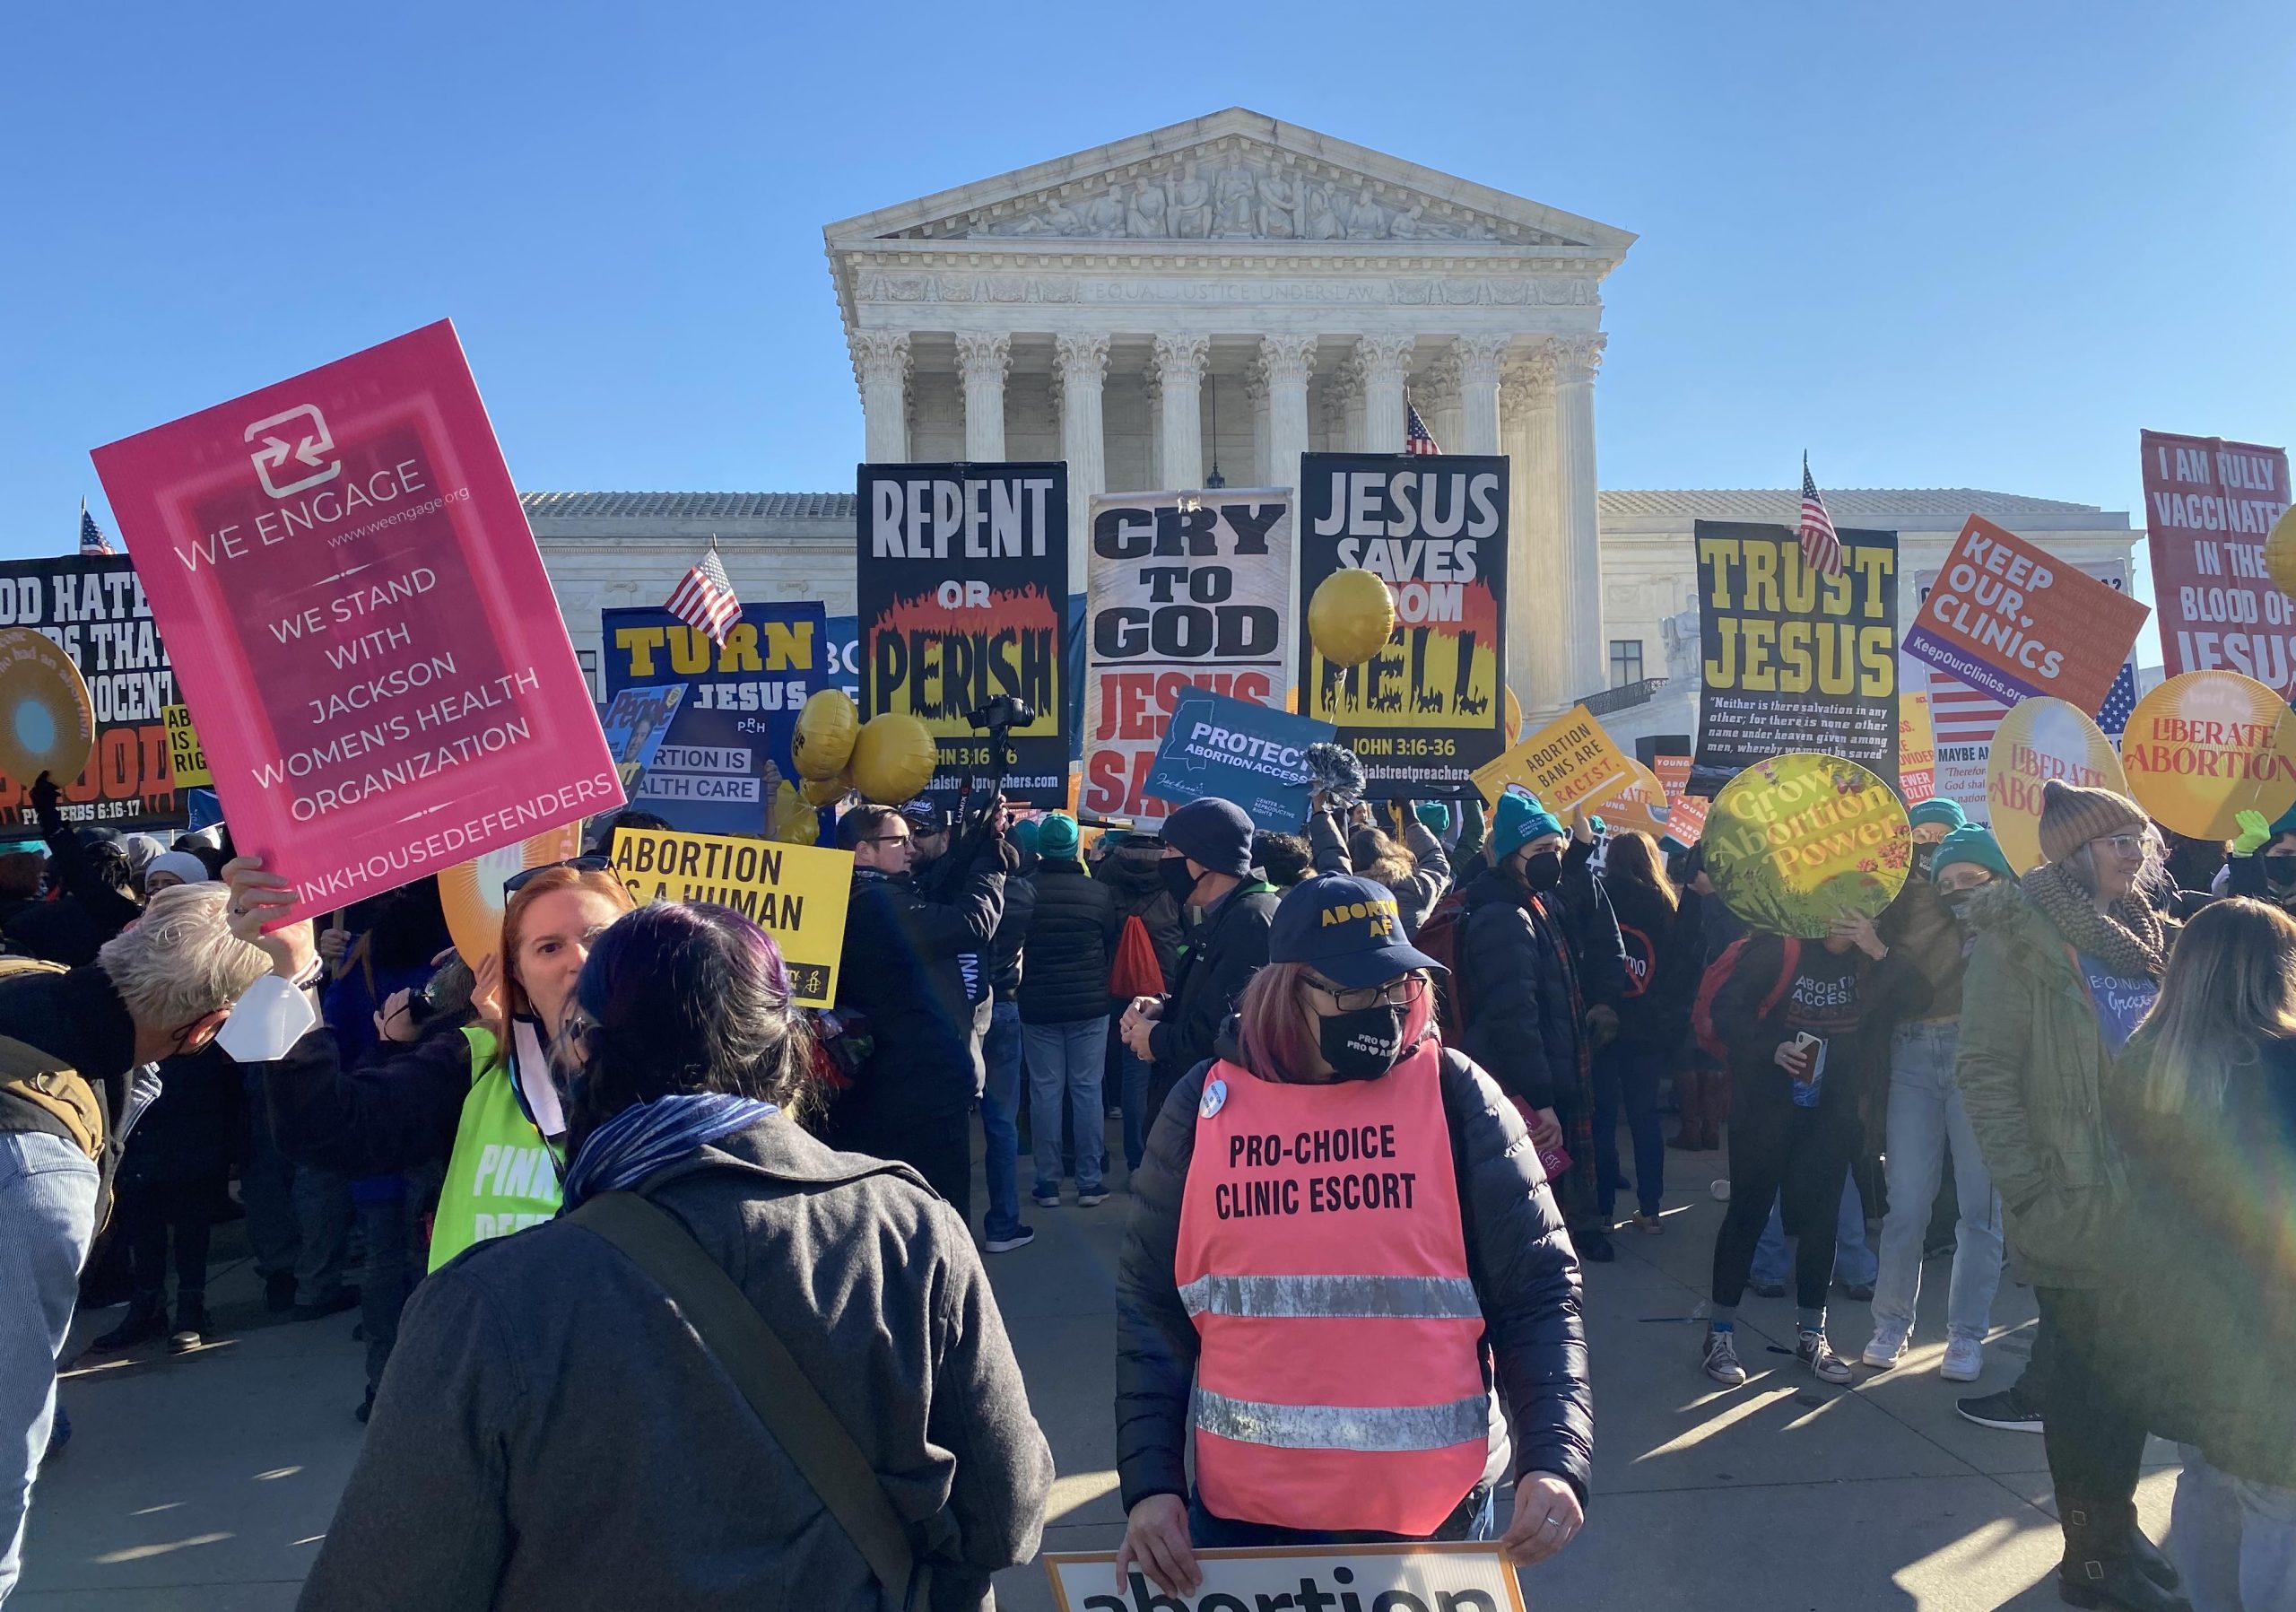 large crowd of supporters and opponents of abortion hold dueling signs in front of supreme court building